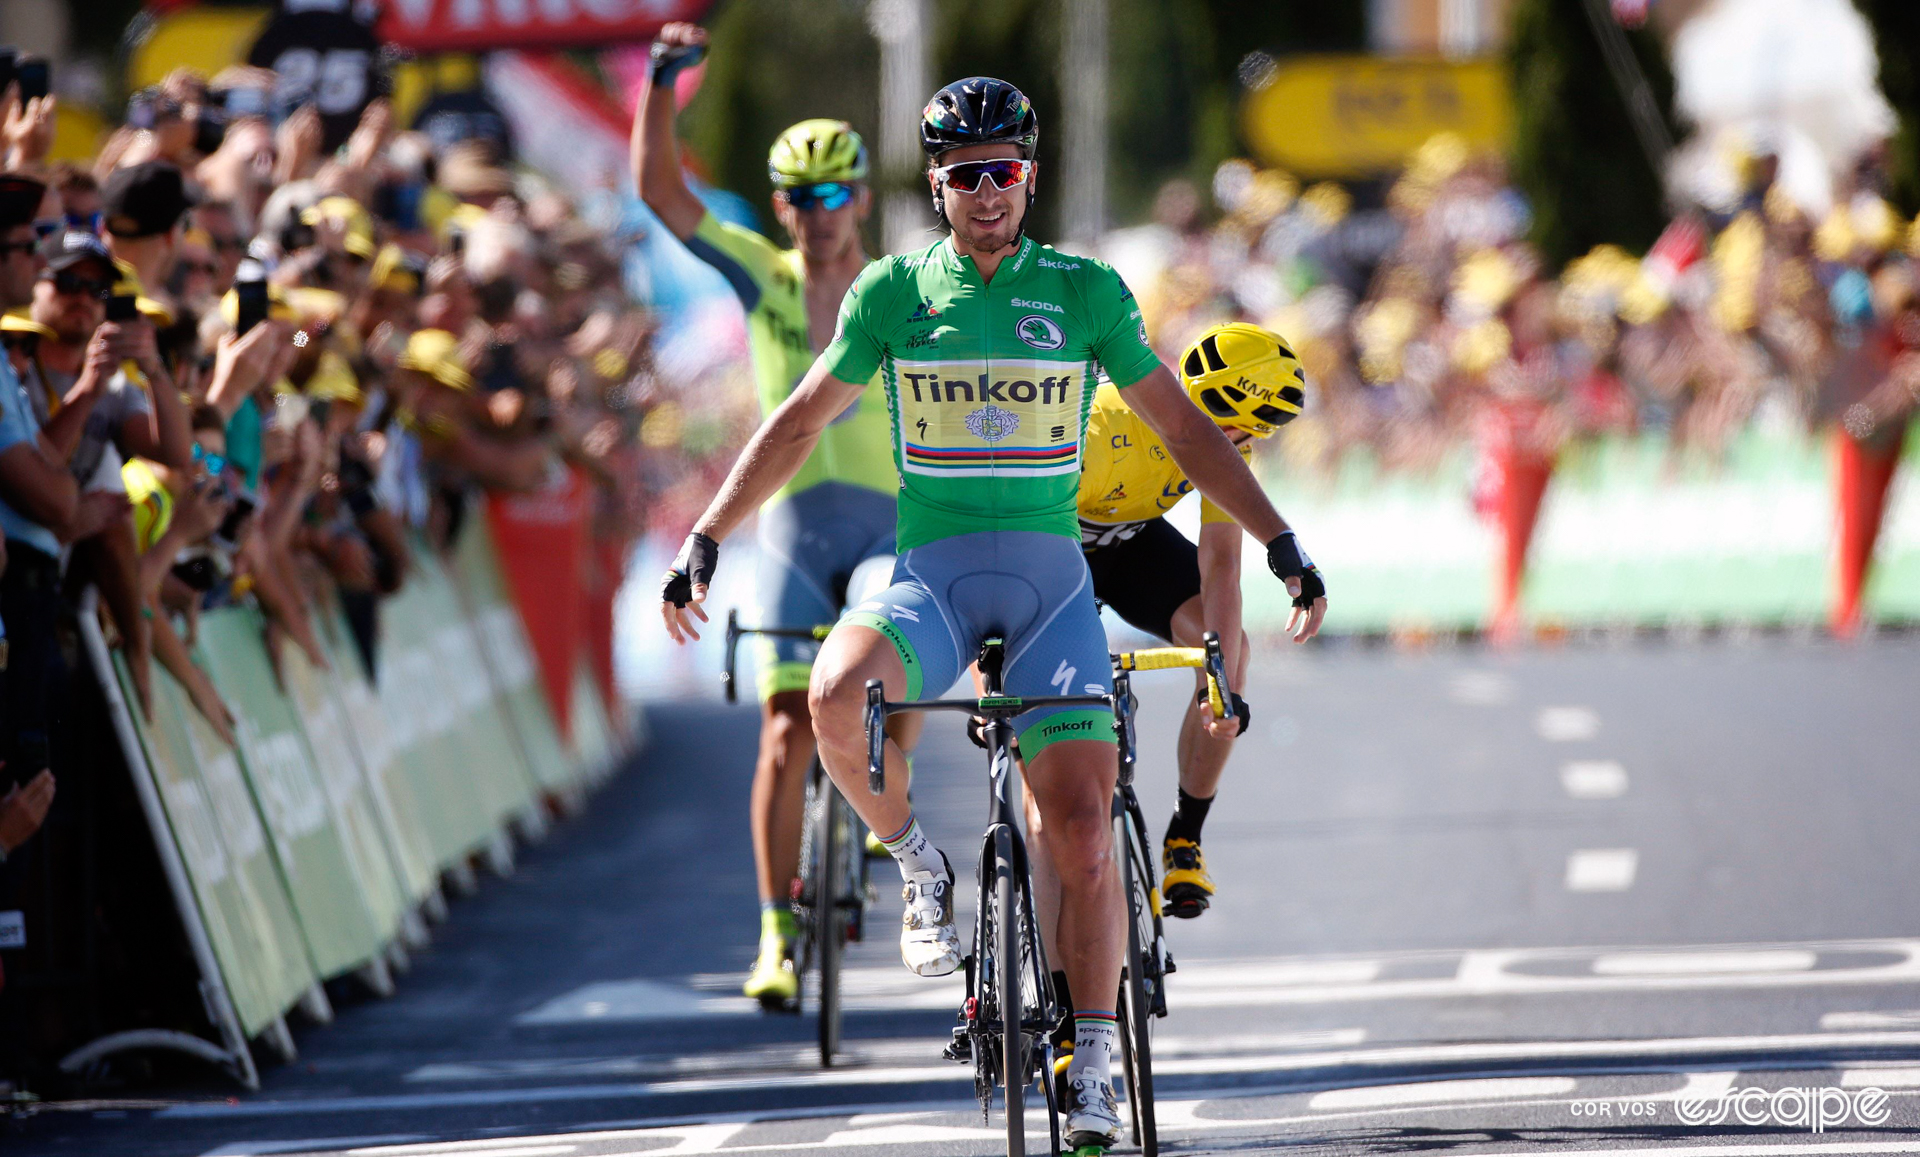 A smiling Peter Sagan celebrates winning a stage at the 2016 Tour de France.